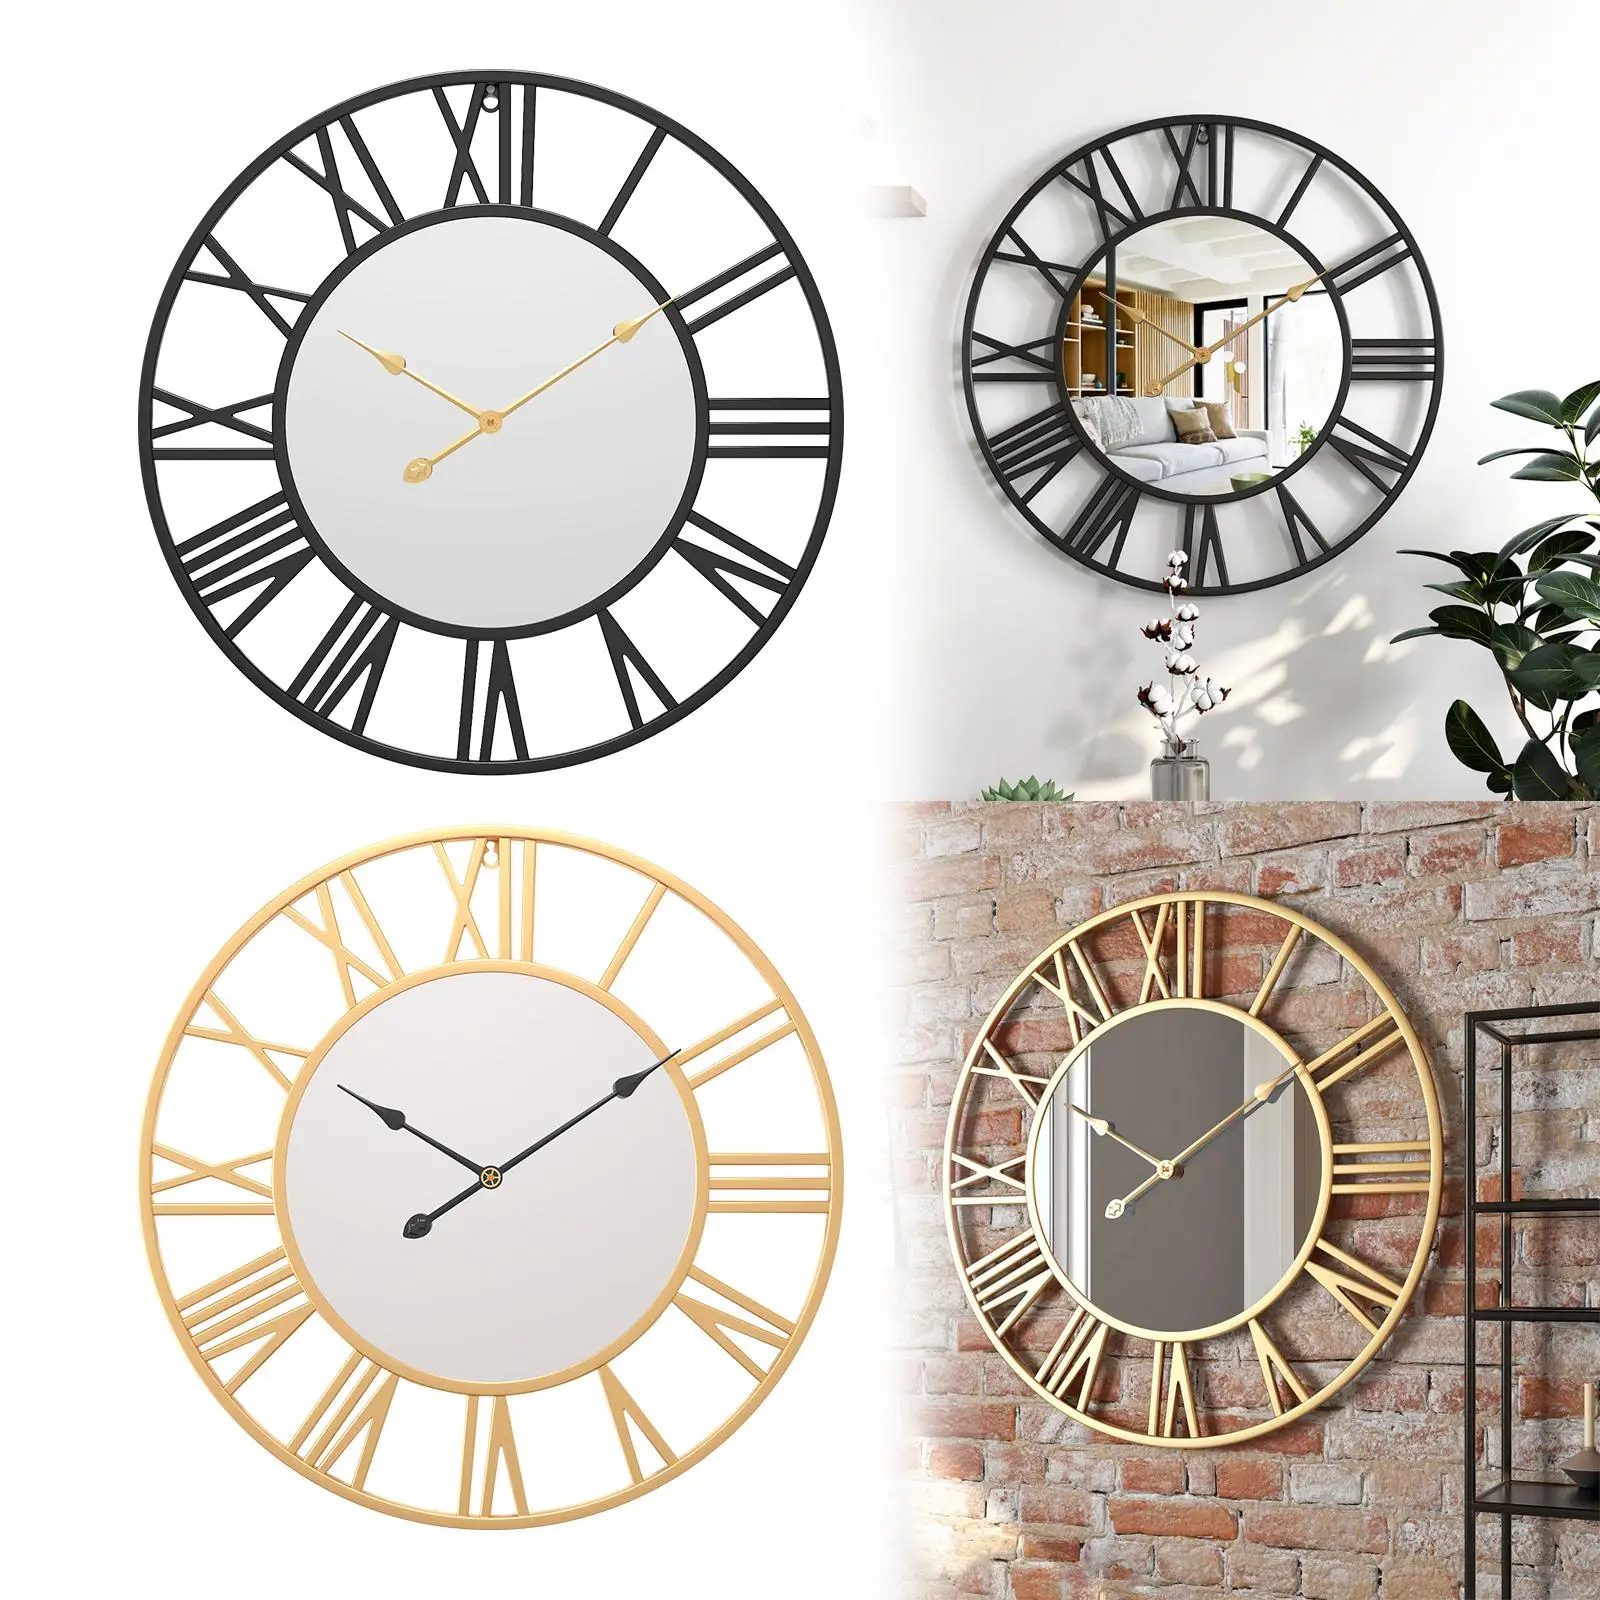 Silent Clock Decoration Roman Numerals 12H Display Battery Operated Round for Cafes Hotels Shops Boys Girls Elderly images - 6